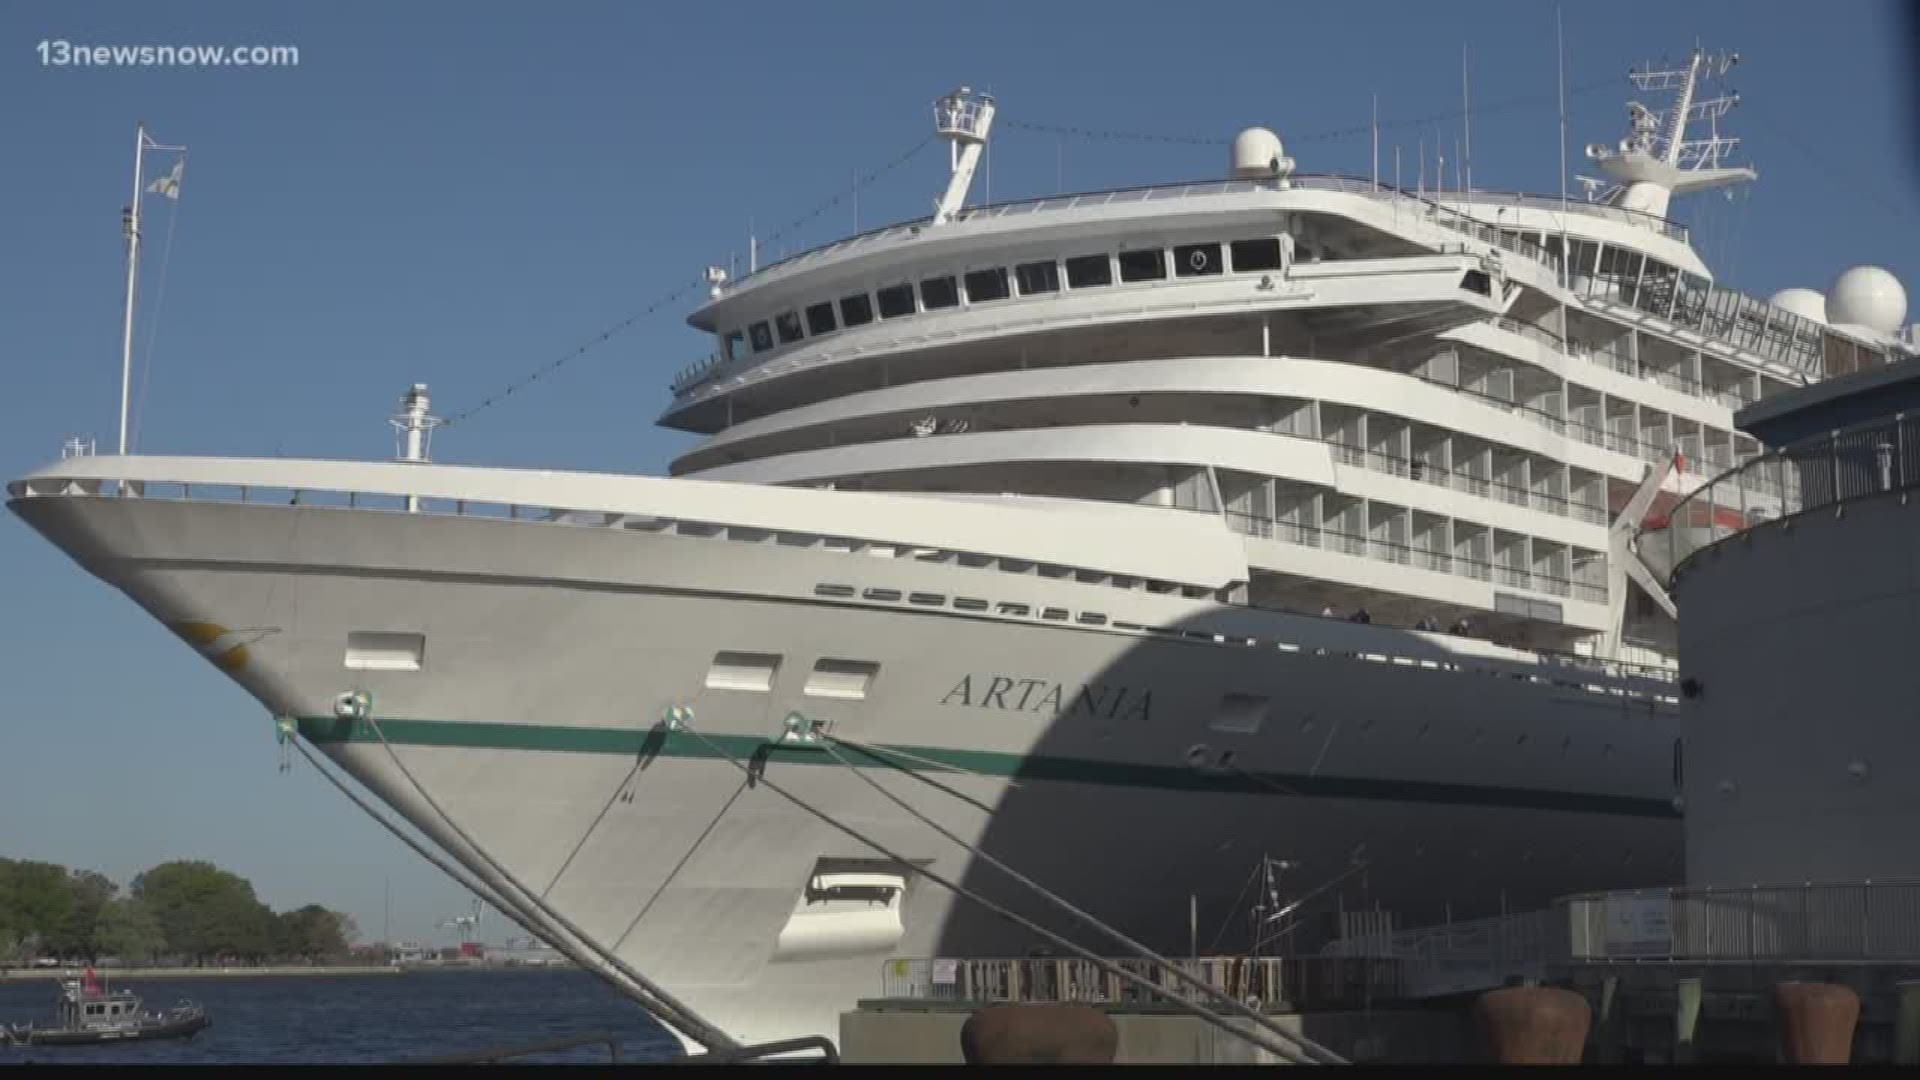 Two cruise ships arrived at Nauticus on Thursday and Friday - bringing in more than 1,800 visitors to downtown Norfolk.